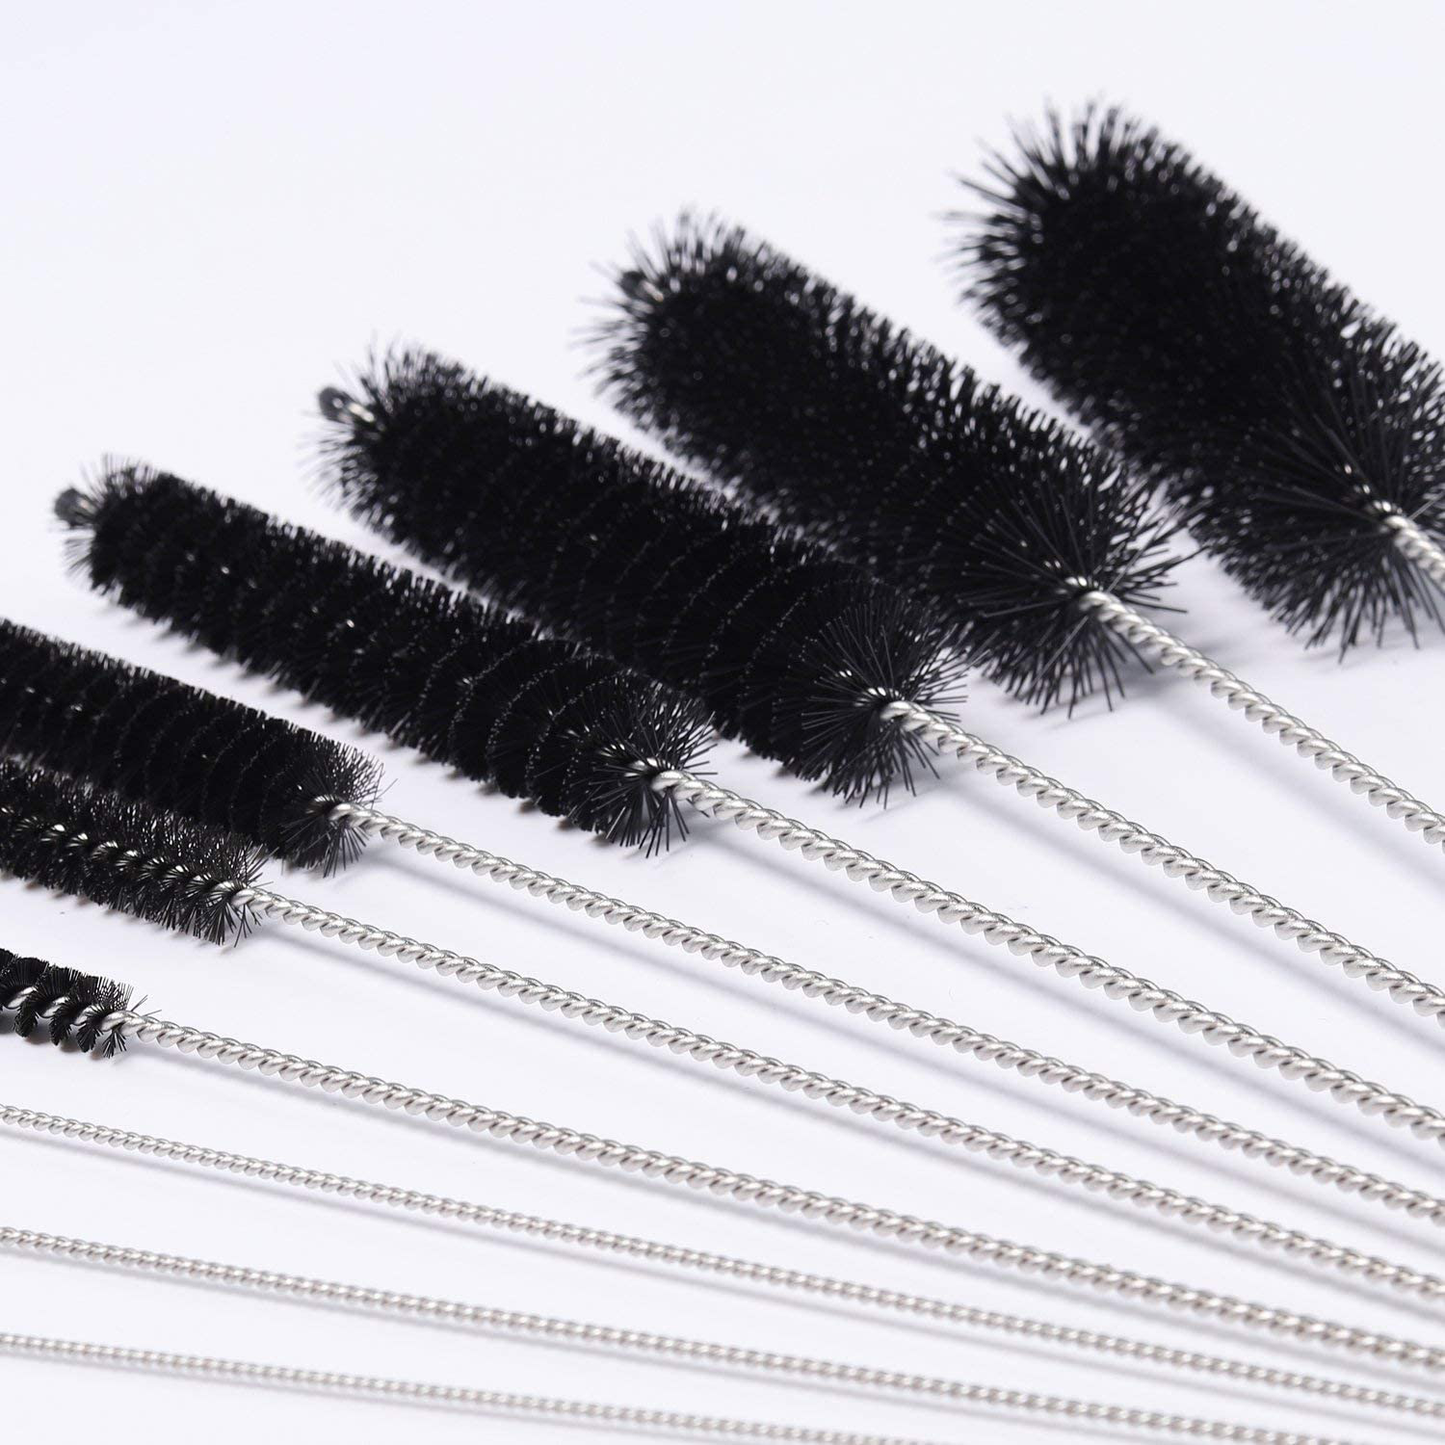 Aquarium Filter Brush Set, Flexible Double Ended Bristles Hose Pipe Cleaner with Stainless Steel Long Tube Cleaning Brush and 10 Pcs Different Sizes Bristles Brushes for Fish Tank or Home Kitchen Animals & Pet Supplies > Pet Supplies > Fish Supplies > Aquarium Cleaning Supplies SLSON   